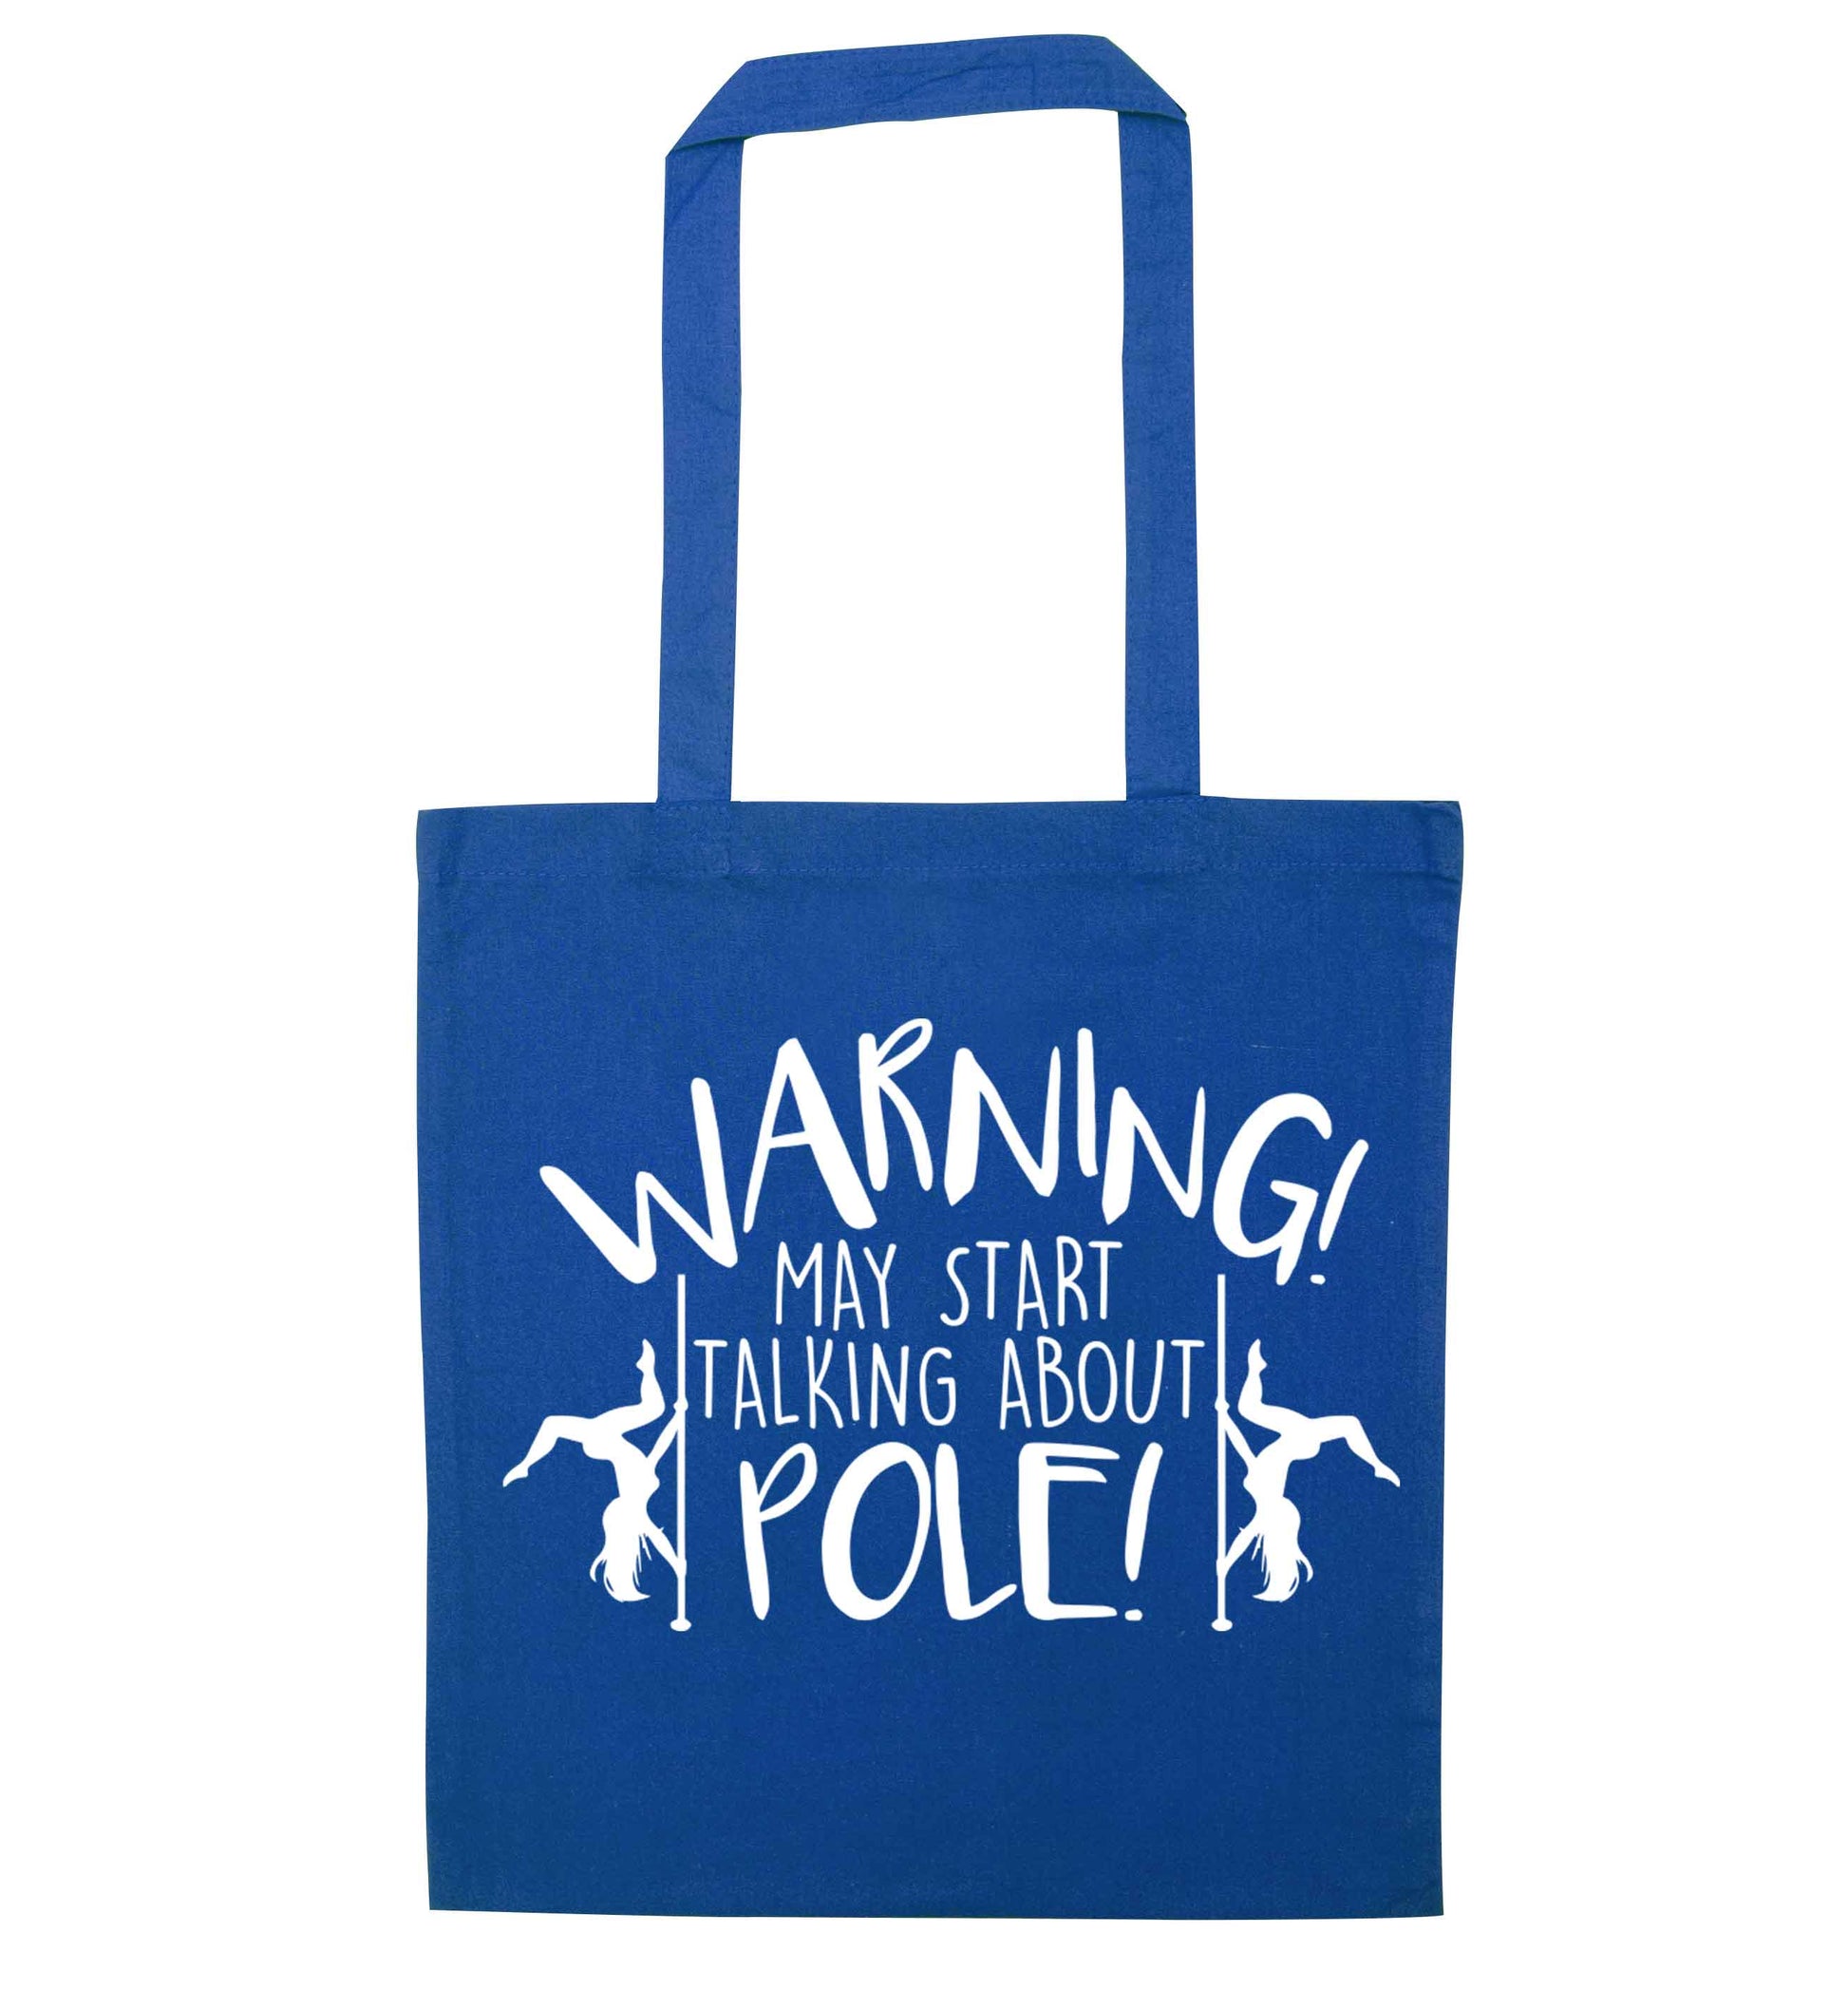 Warning may start talking about pole  blue tote bag